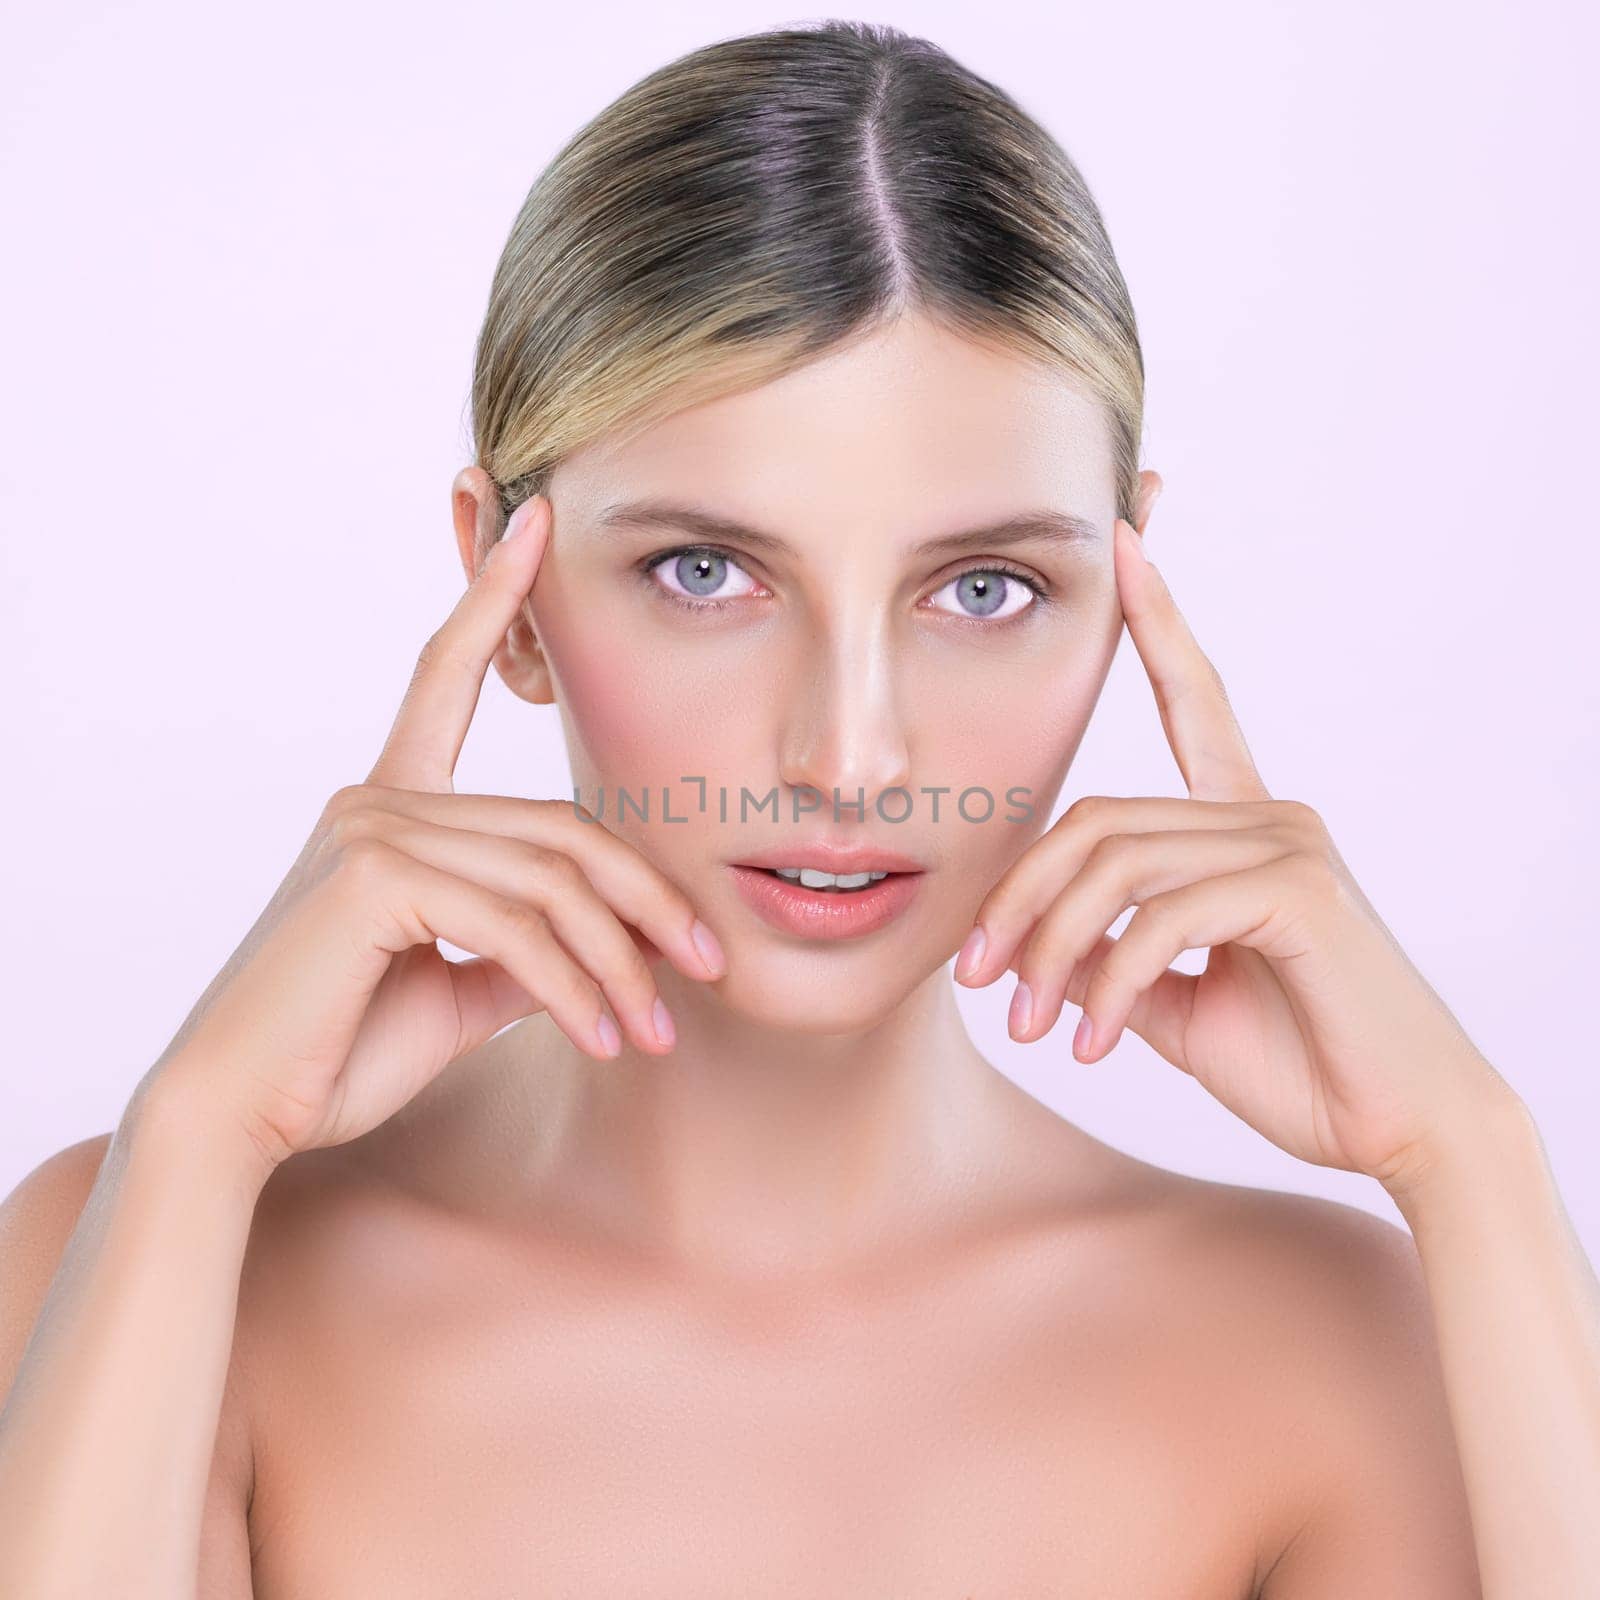 Alluring beautiful woman with perfect smooth and clean skin portrait in isolated background. Beauty hand gesture with expressive facial expression for skincare treatment product or spa.